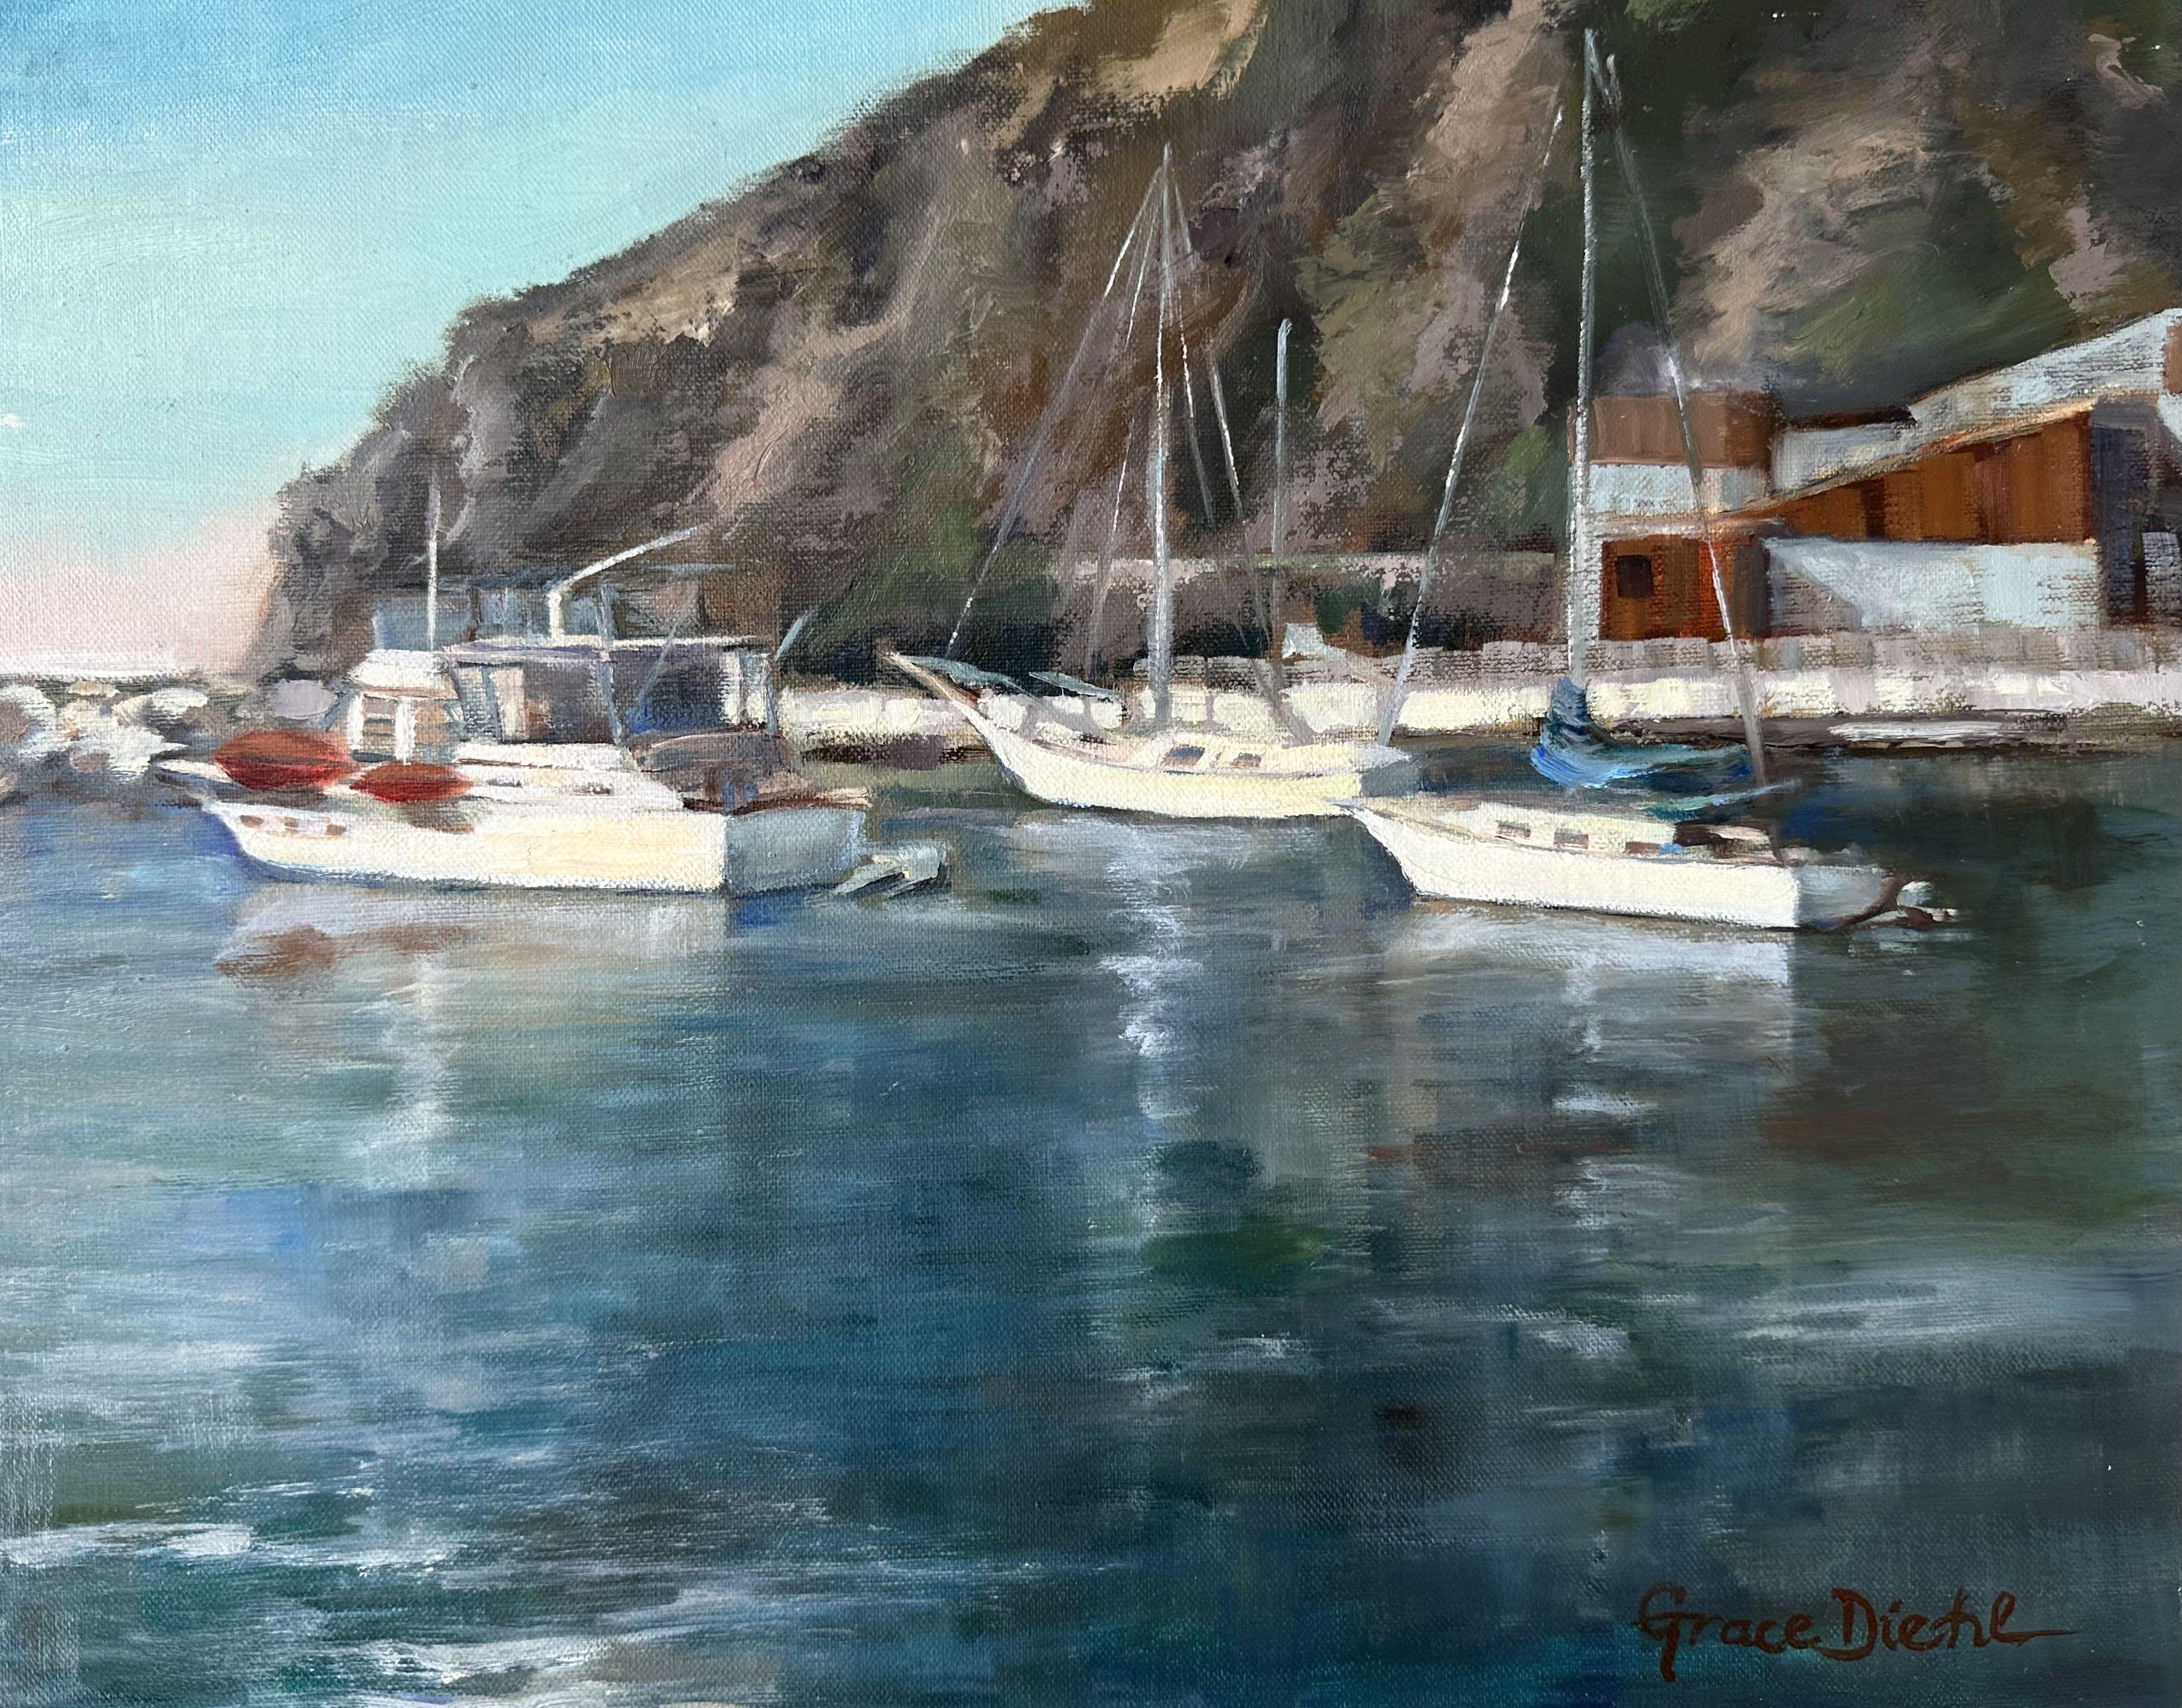 As a fine artist who specializes in plein air painting, I love to explore new and interesting places to paint. Recently, I discovered the stunning beauty of Dana Point, CA, and I was immediately inspired to create a painting from this special place.